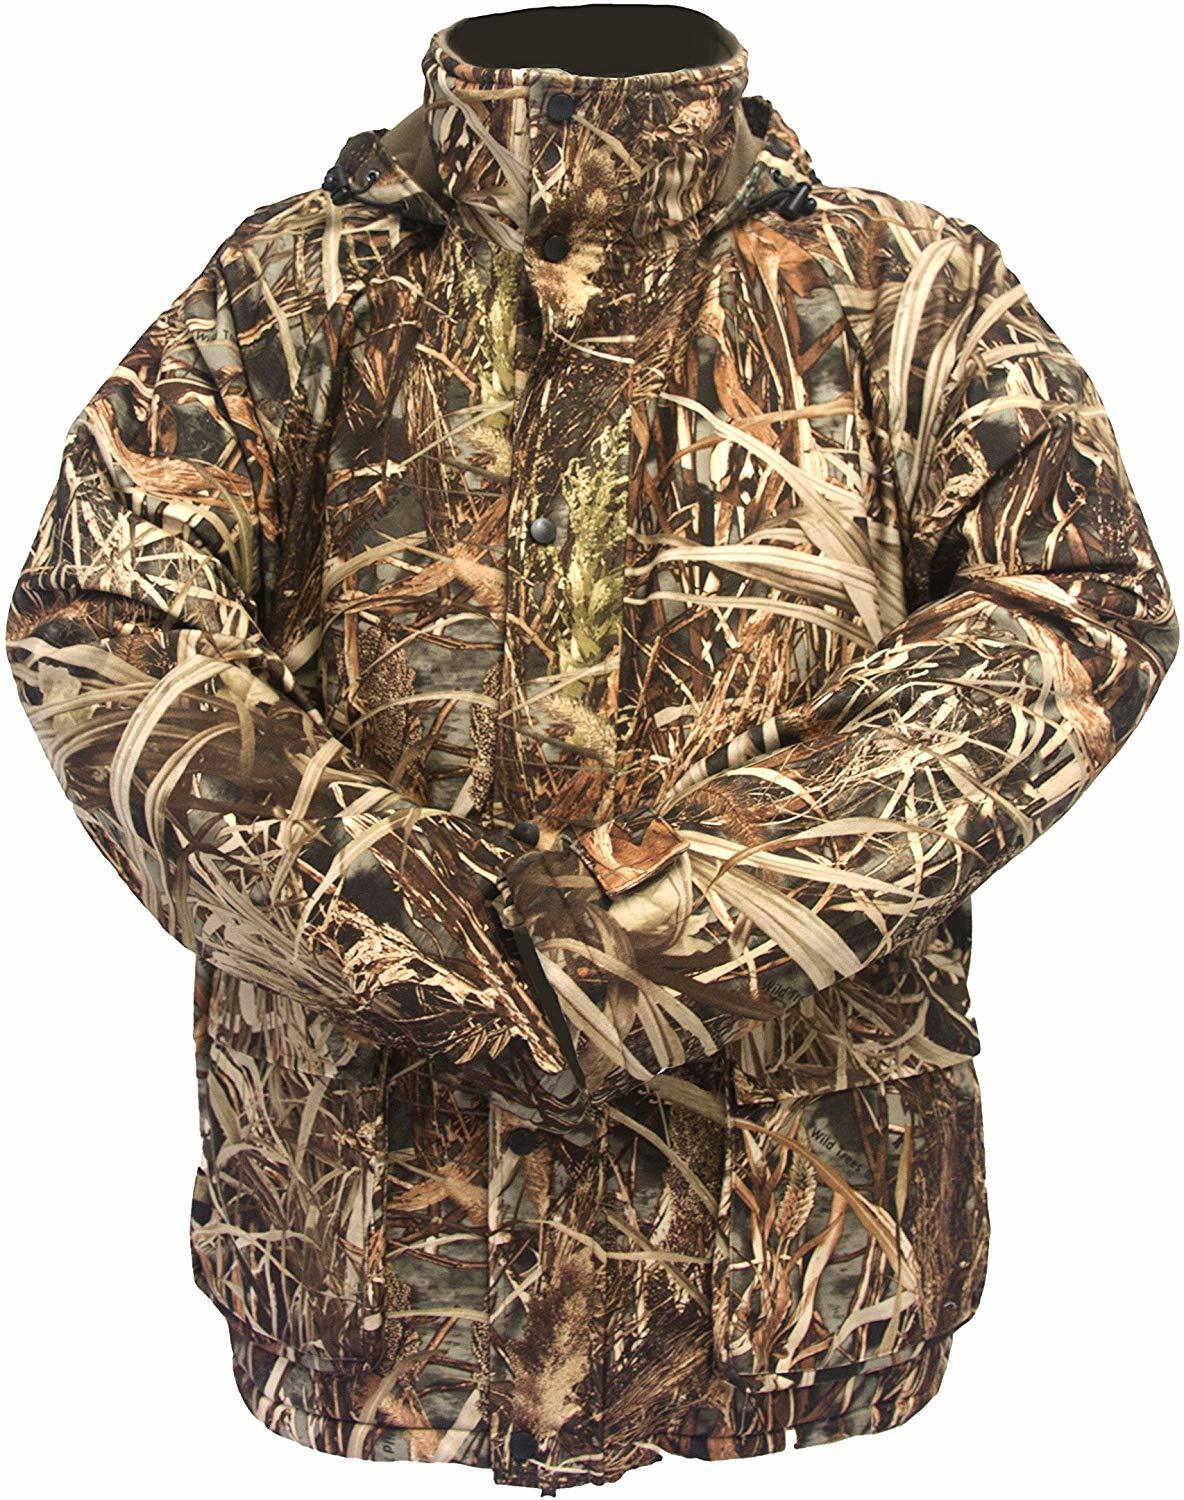 Wildfowler Outfitter Performance Camo Hunting Parka